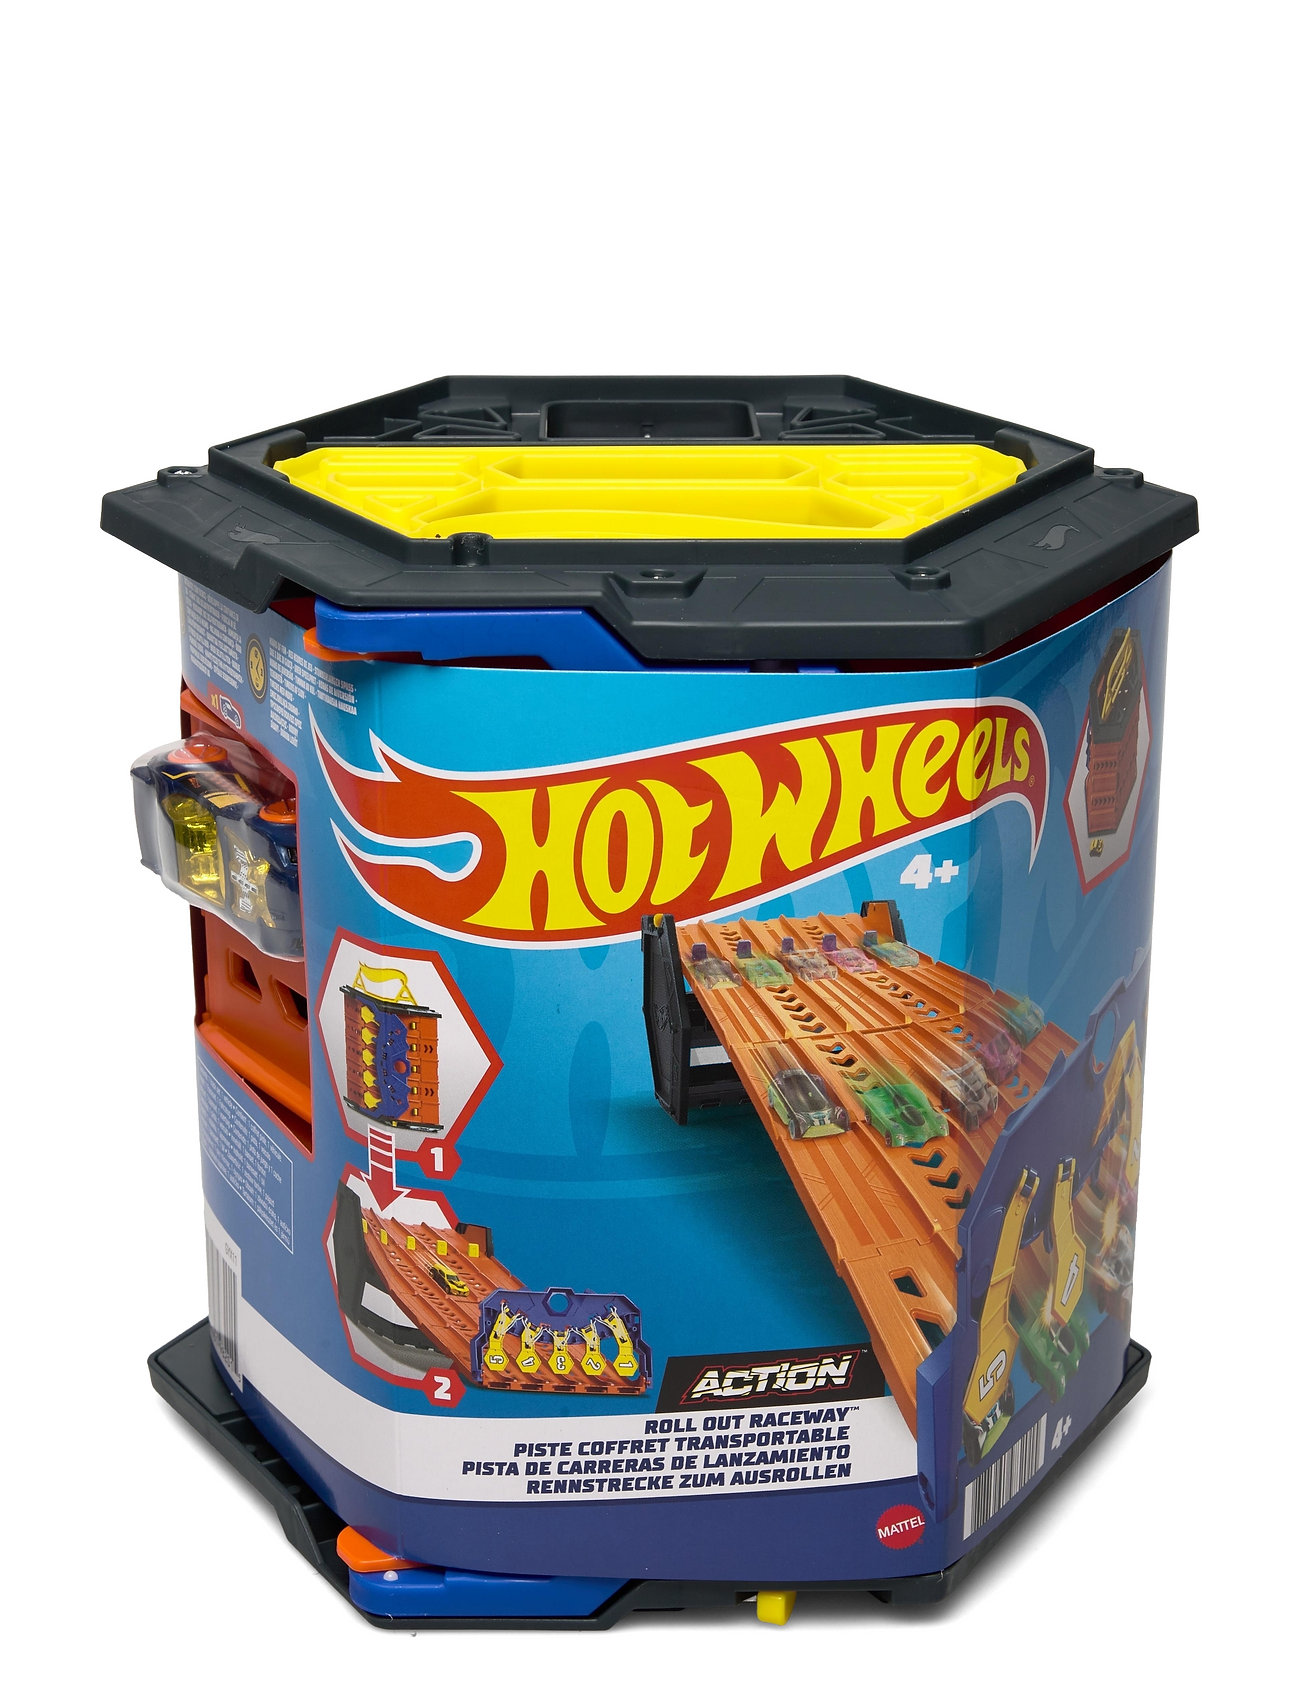 Hot Wheels Roll Out Raceway, Track Set Toys Toy Cars & Vehicles Race Tracks Multi/mönstrad Hot Wheels